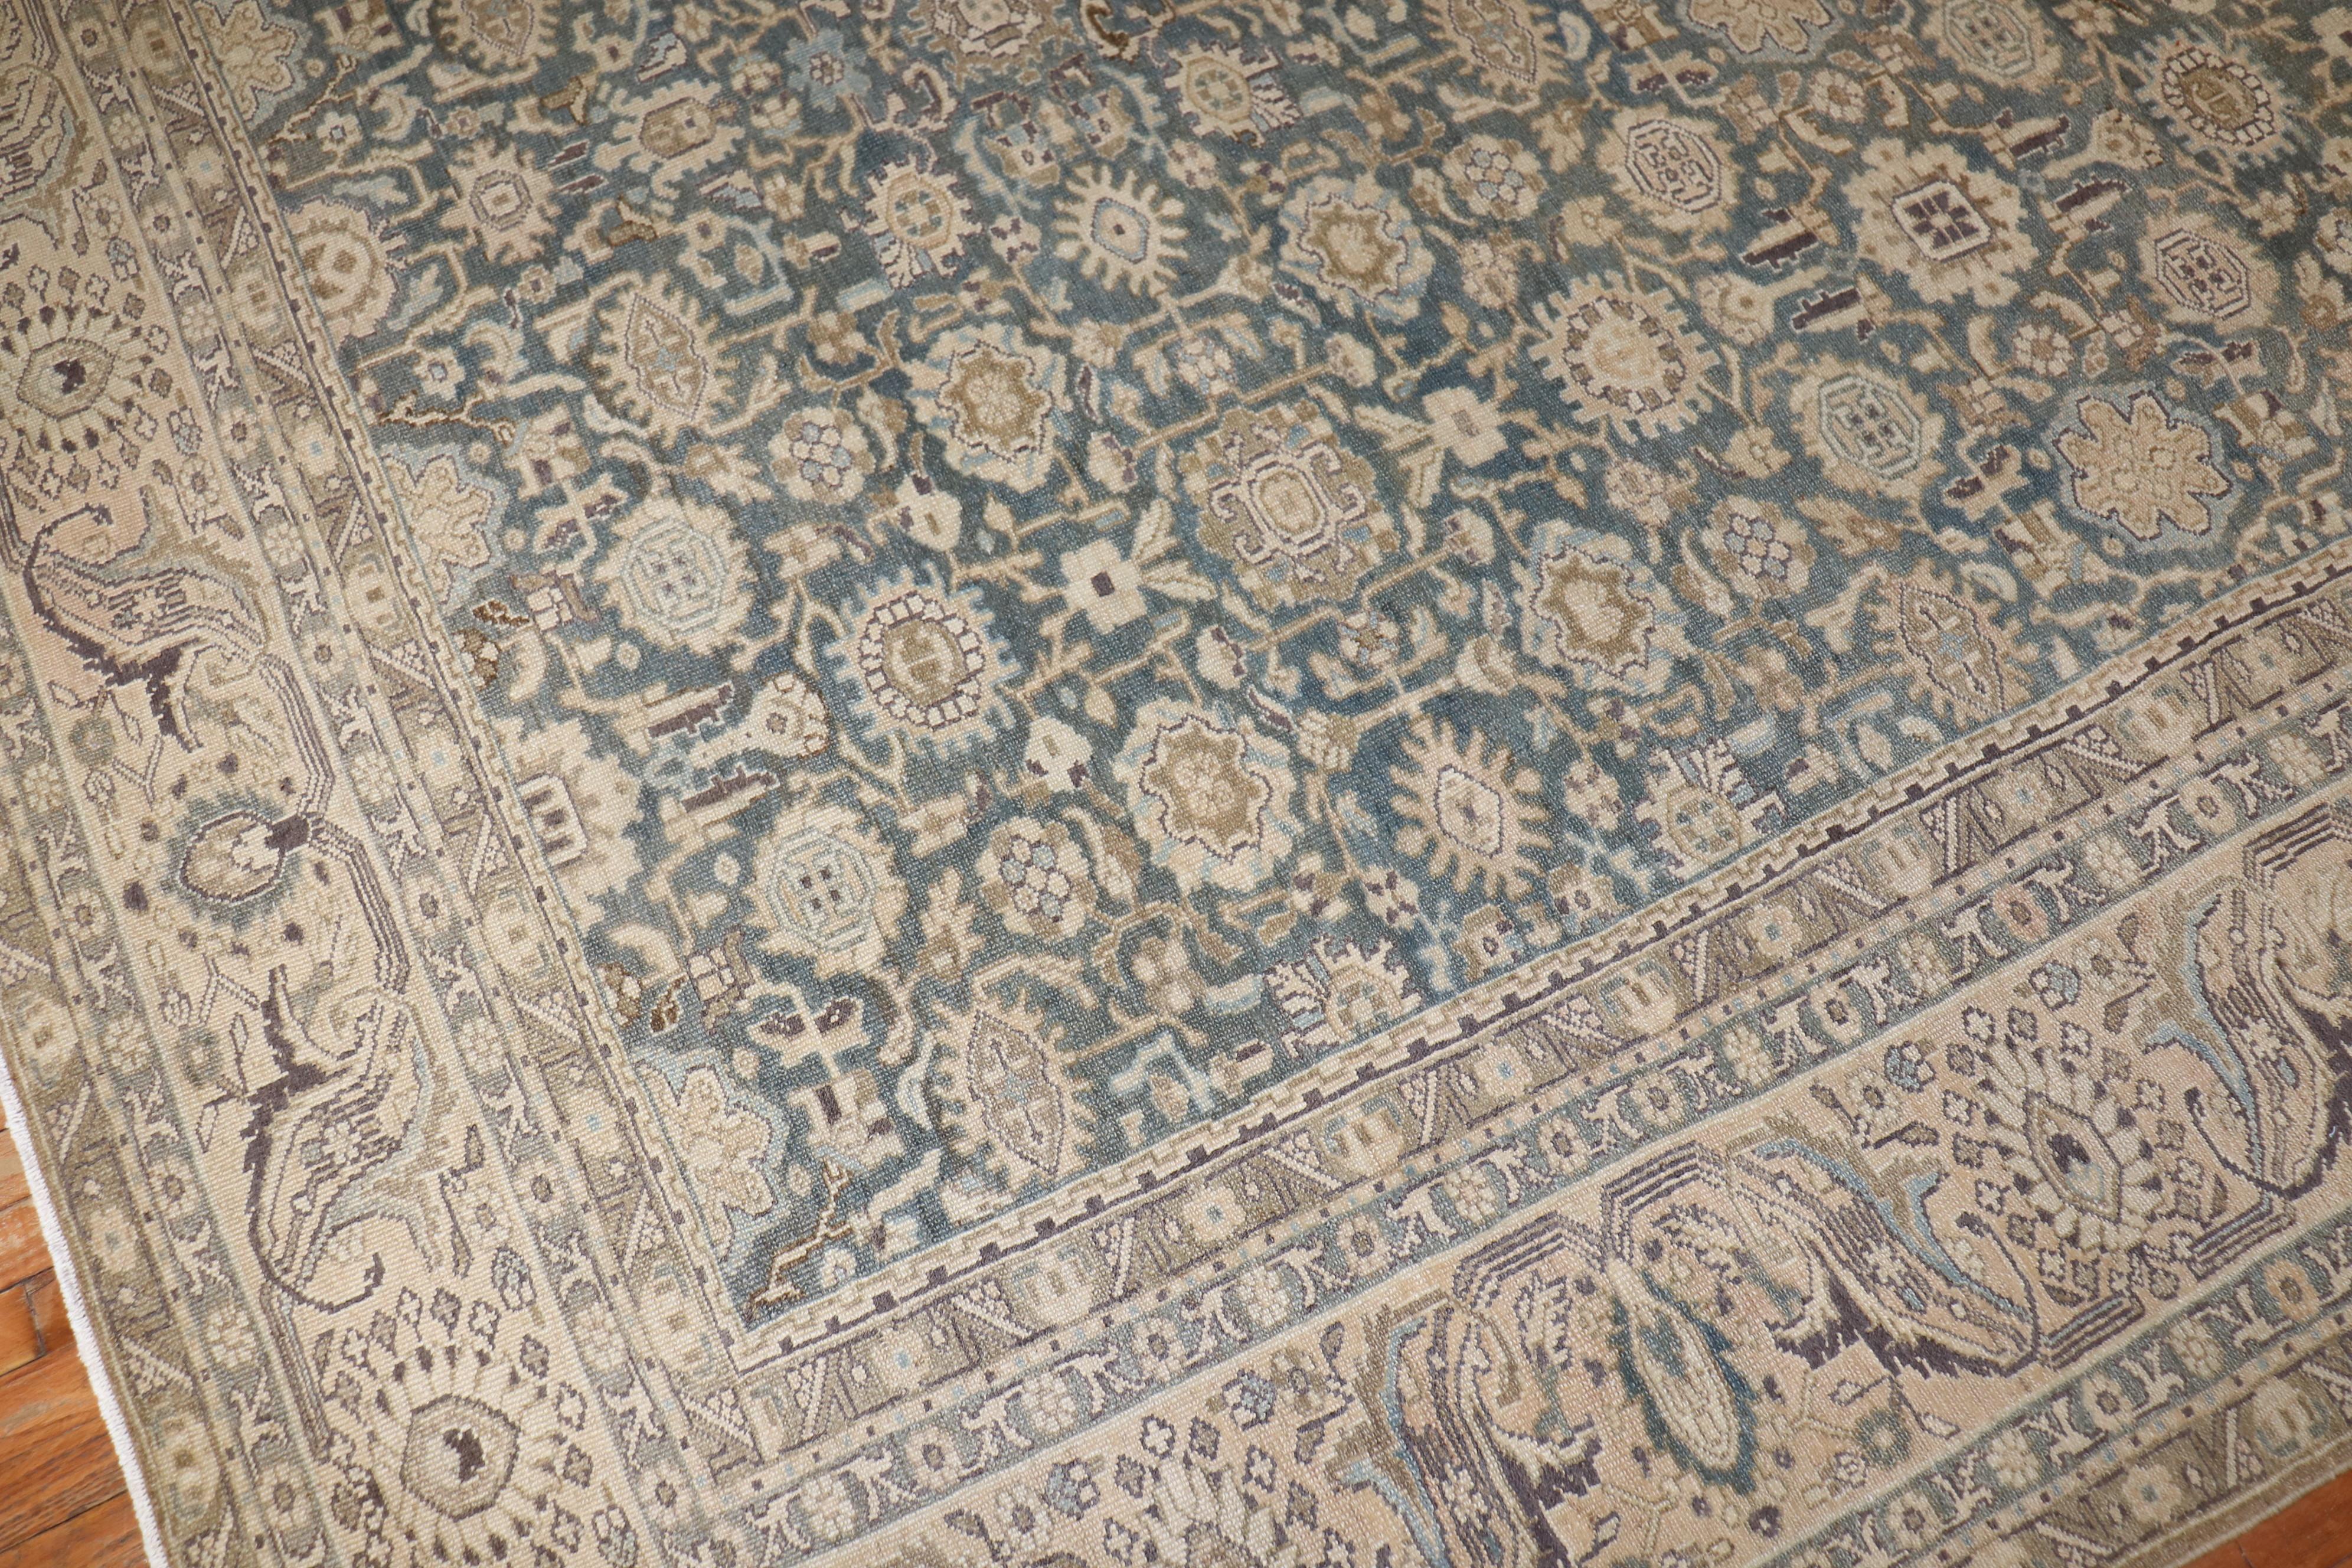 Room size 1930s Persian Malayer Rug. Blue, tan, khaki, brown and green tones.

Measures 10'10'' x 14'.